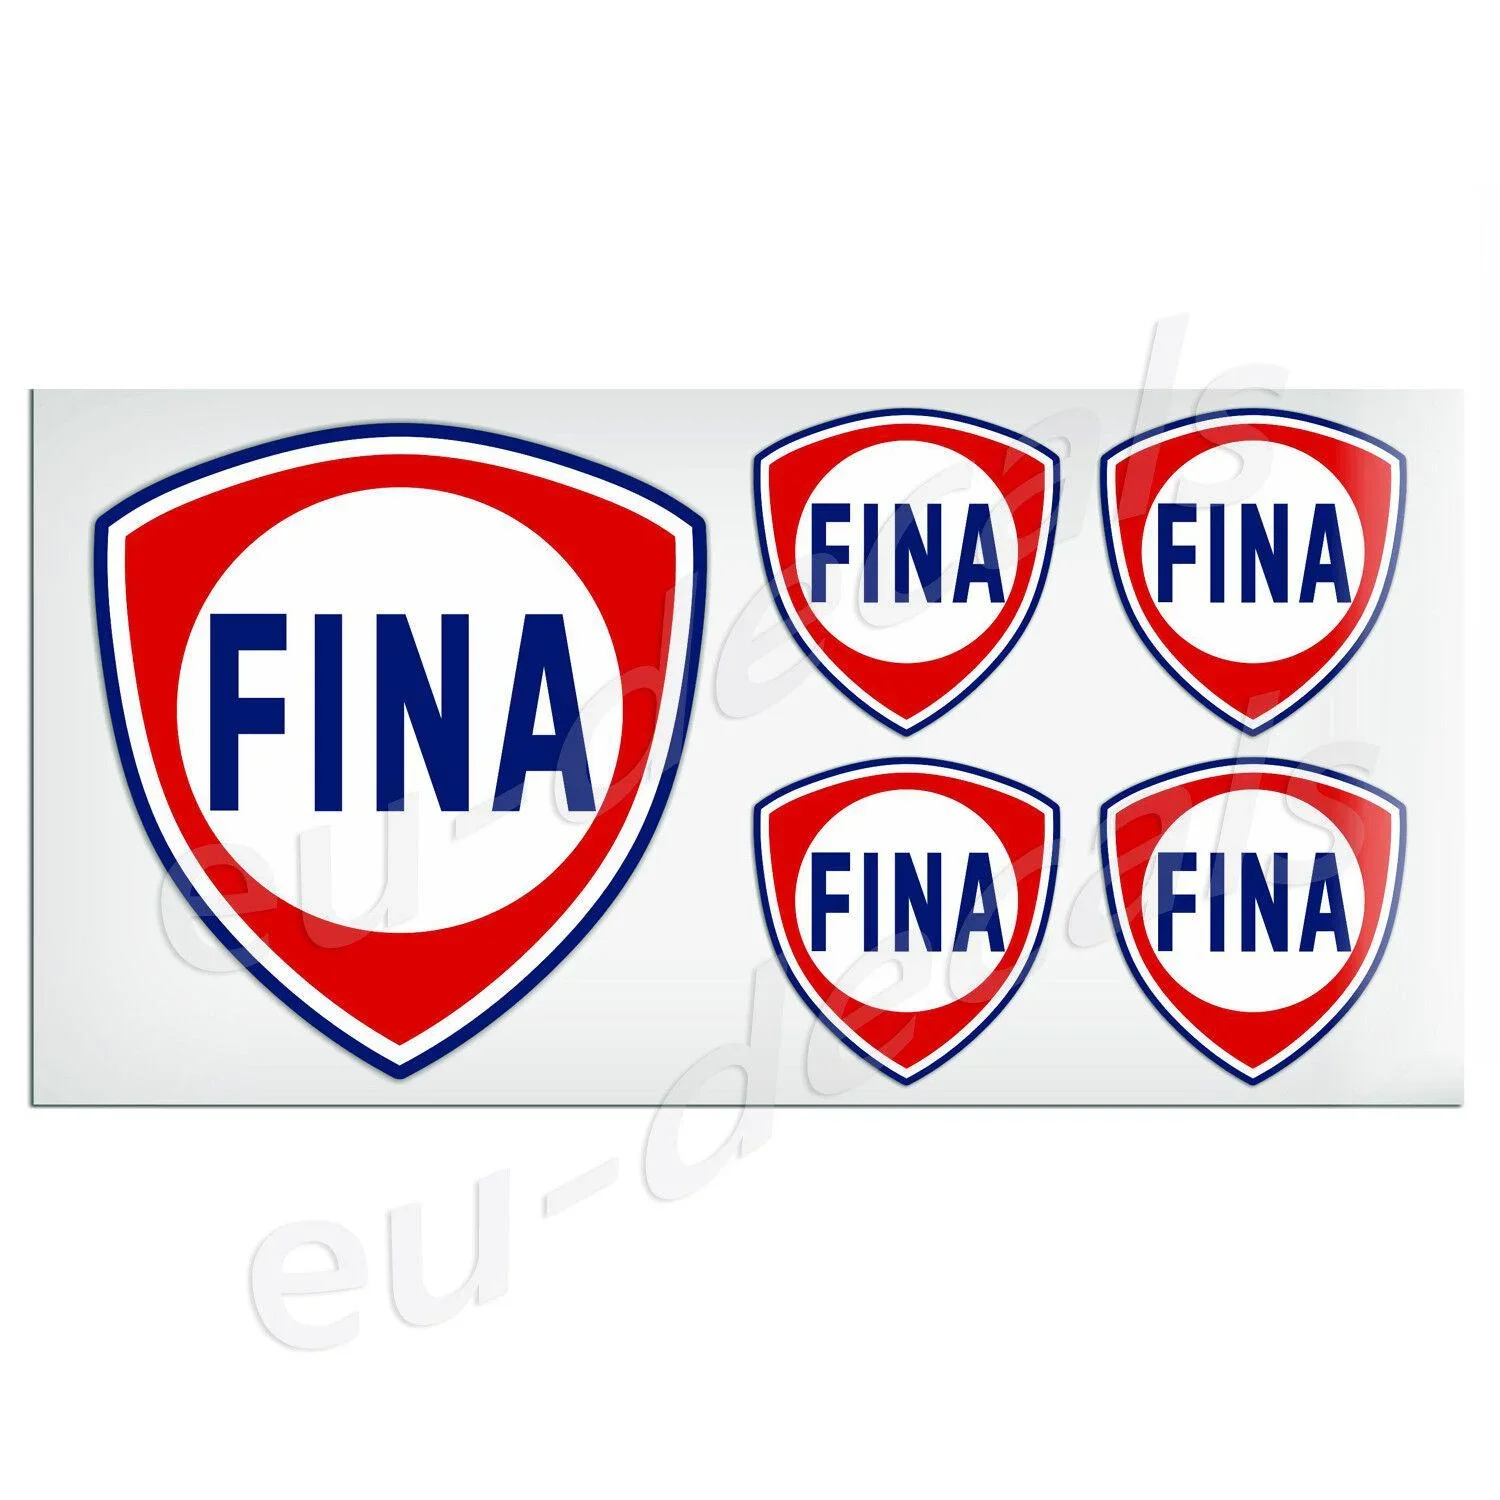 

For 100mm-4* & 50mm-2" Vintage FINA Gas Laminated Decal Sticker classic vespa retro